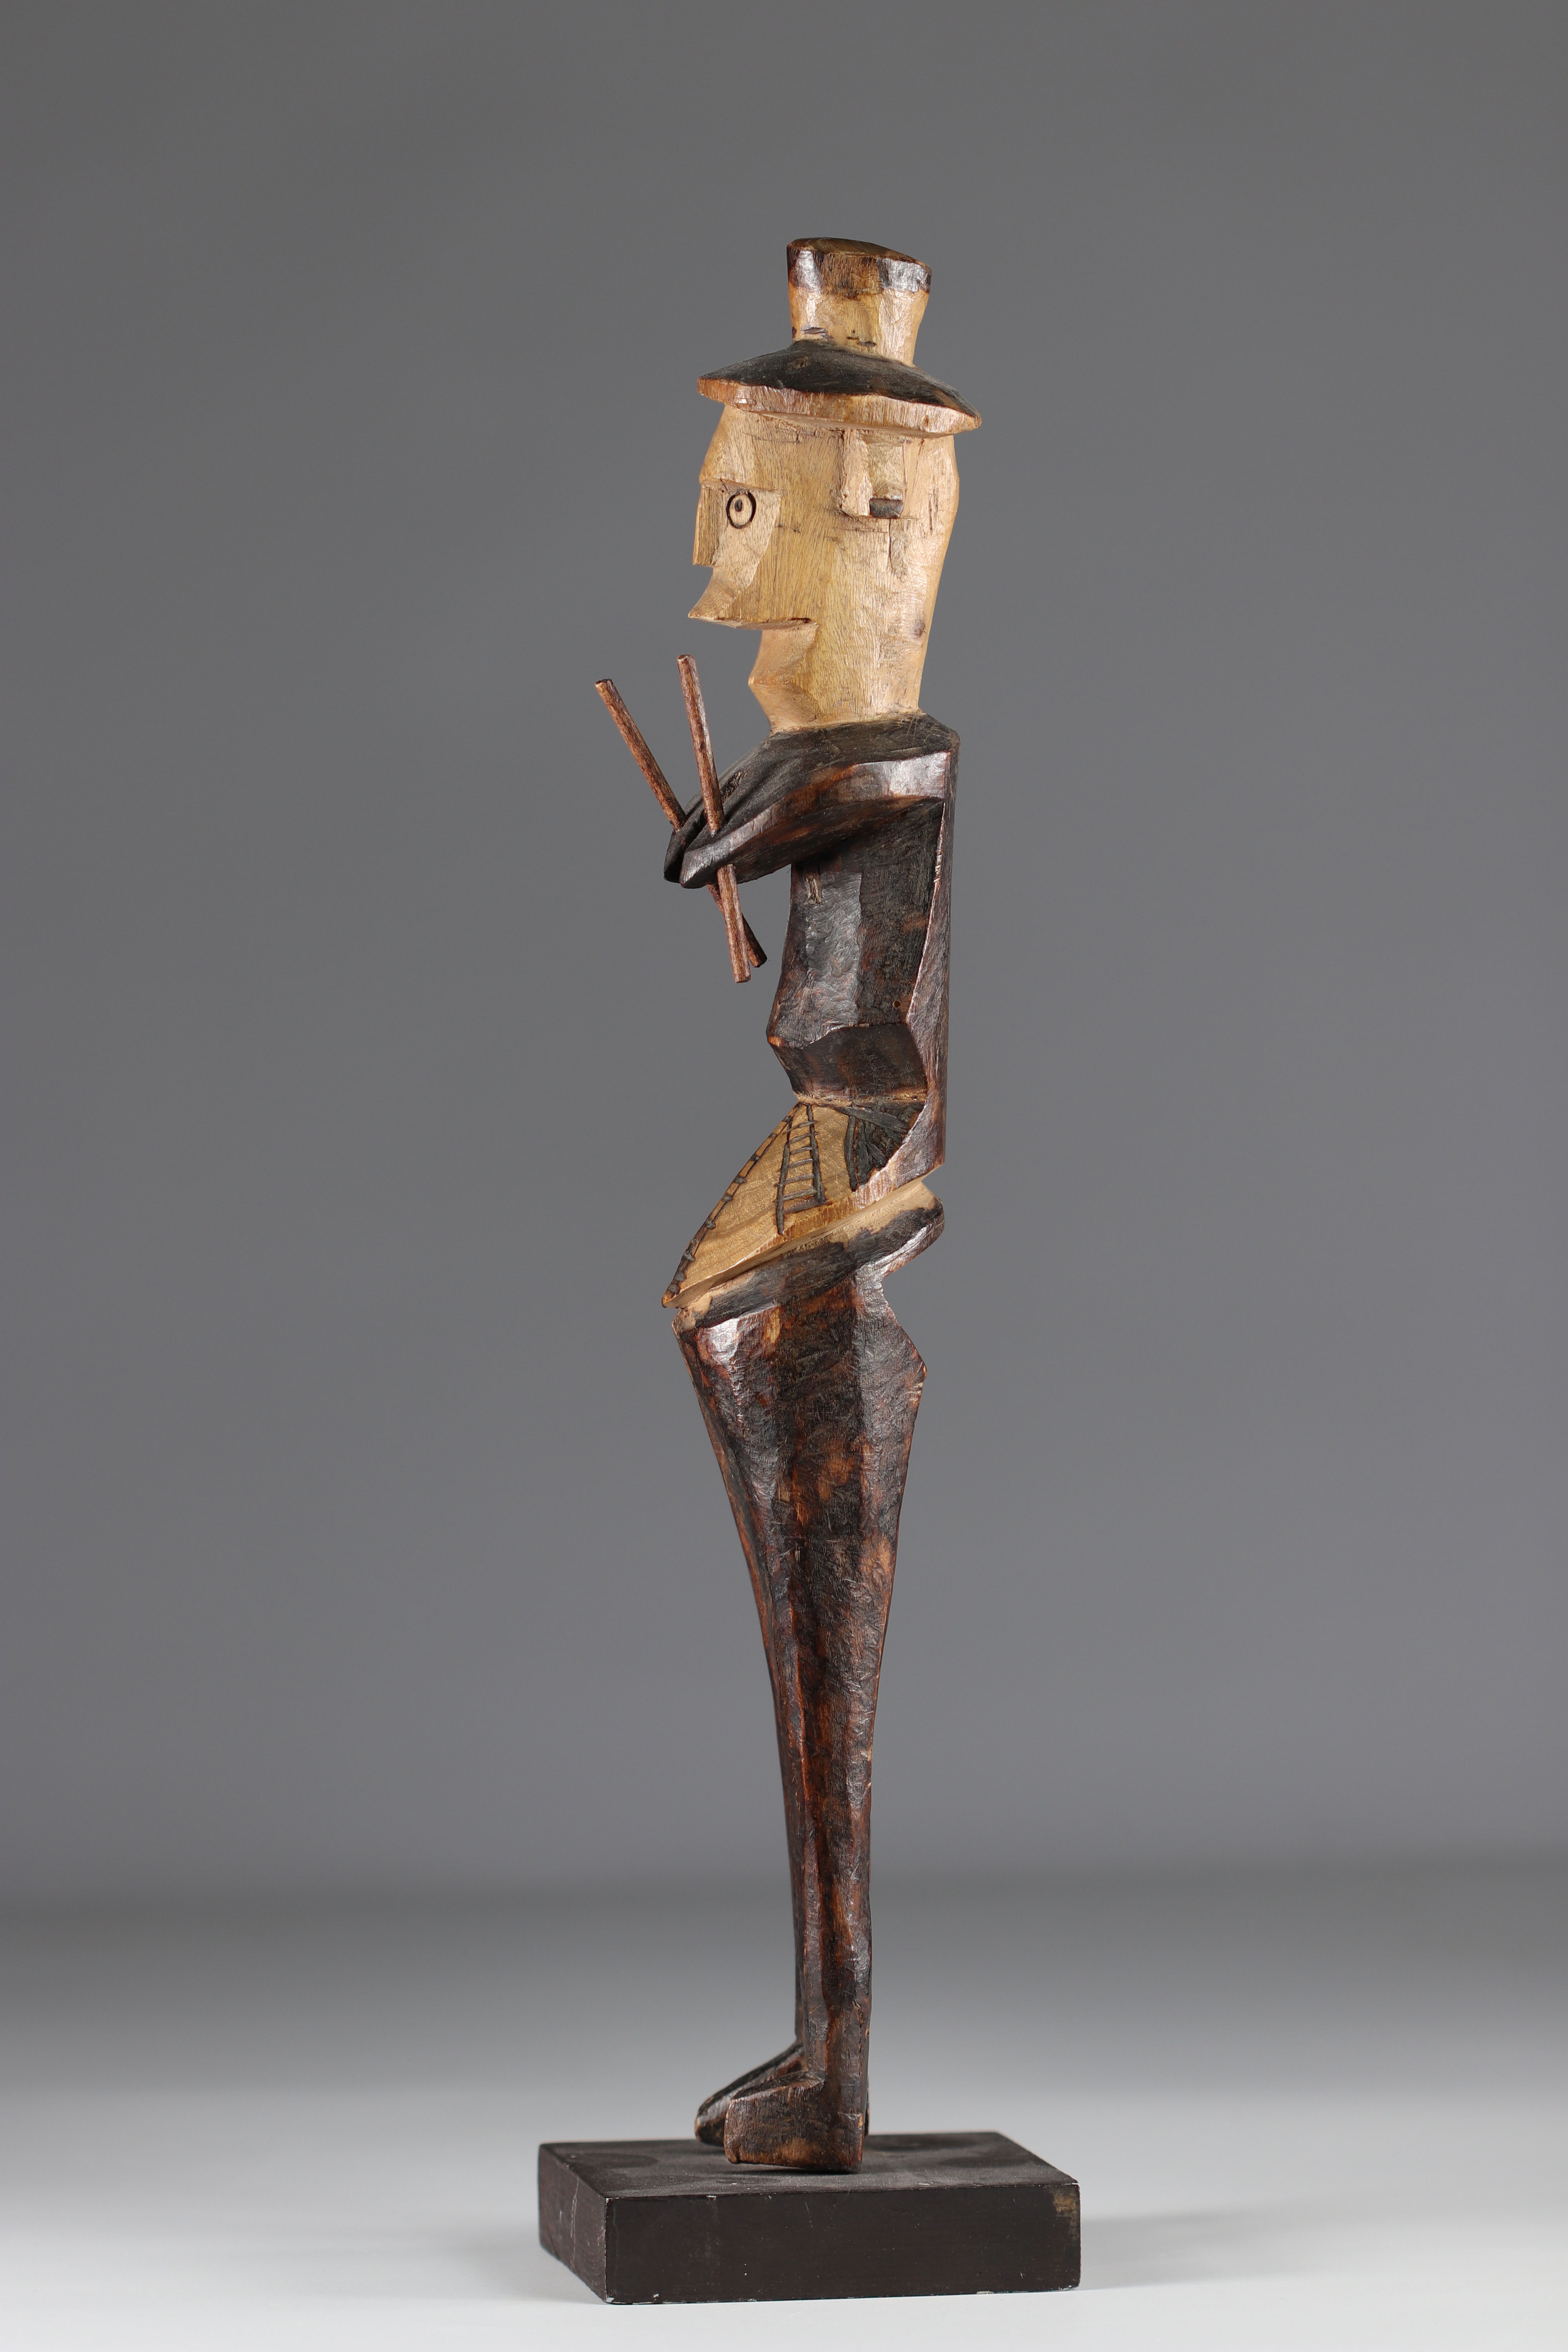 Colonial effigy Zande - 1st half of the 20th century - Africa DRC - Image 3 of 4